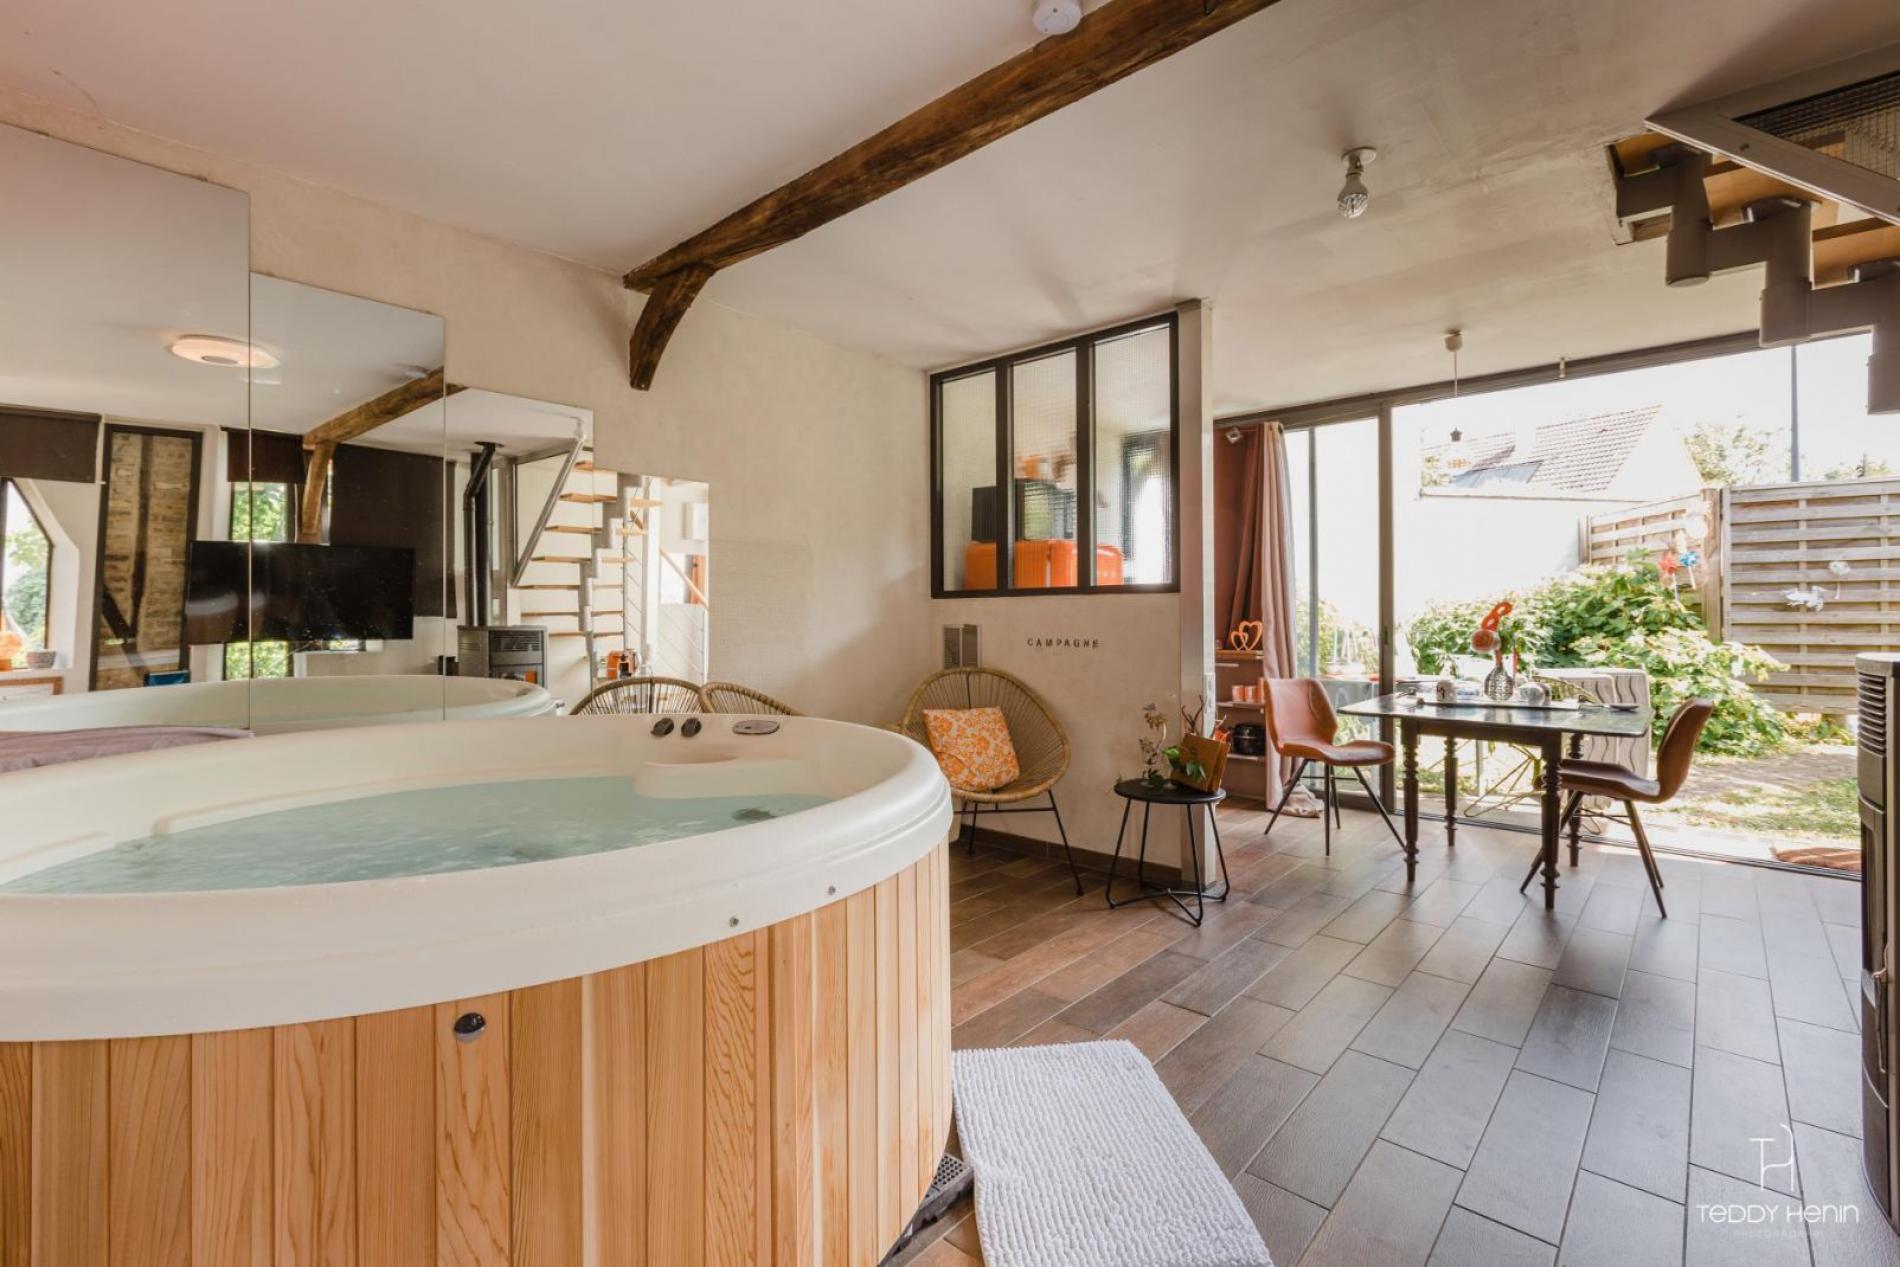 « l’atelier love » independent loft with private jacuzzi and terrace. 